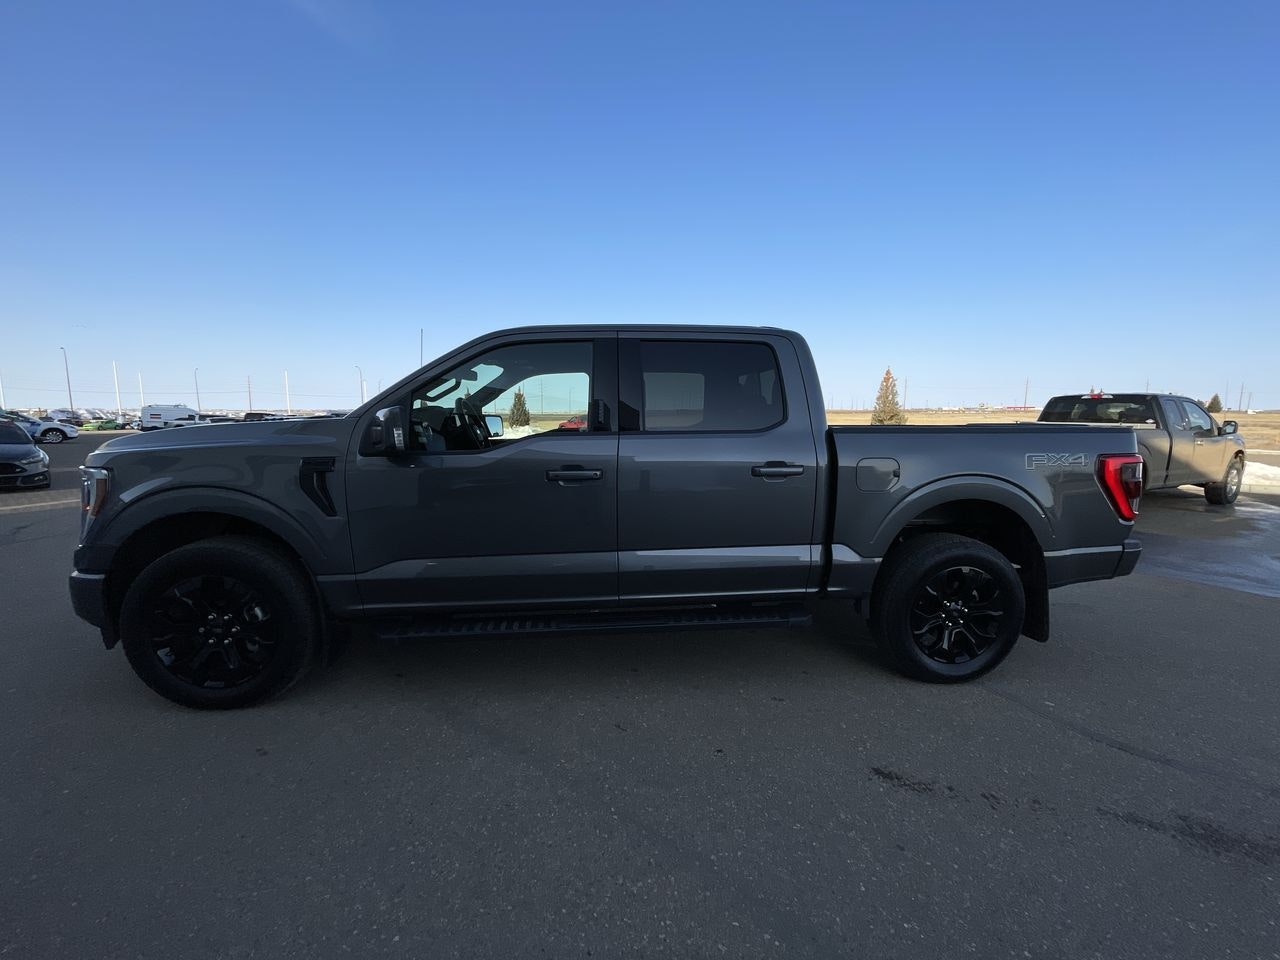 2022 Ford F-150 Crew Cab 4x4 Lariat Sport FX4 Black Package 502A MOON ROOF (T123028A) Main Image